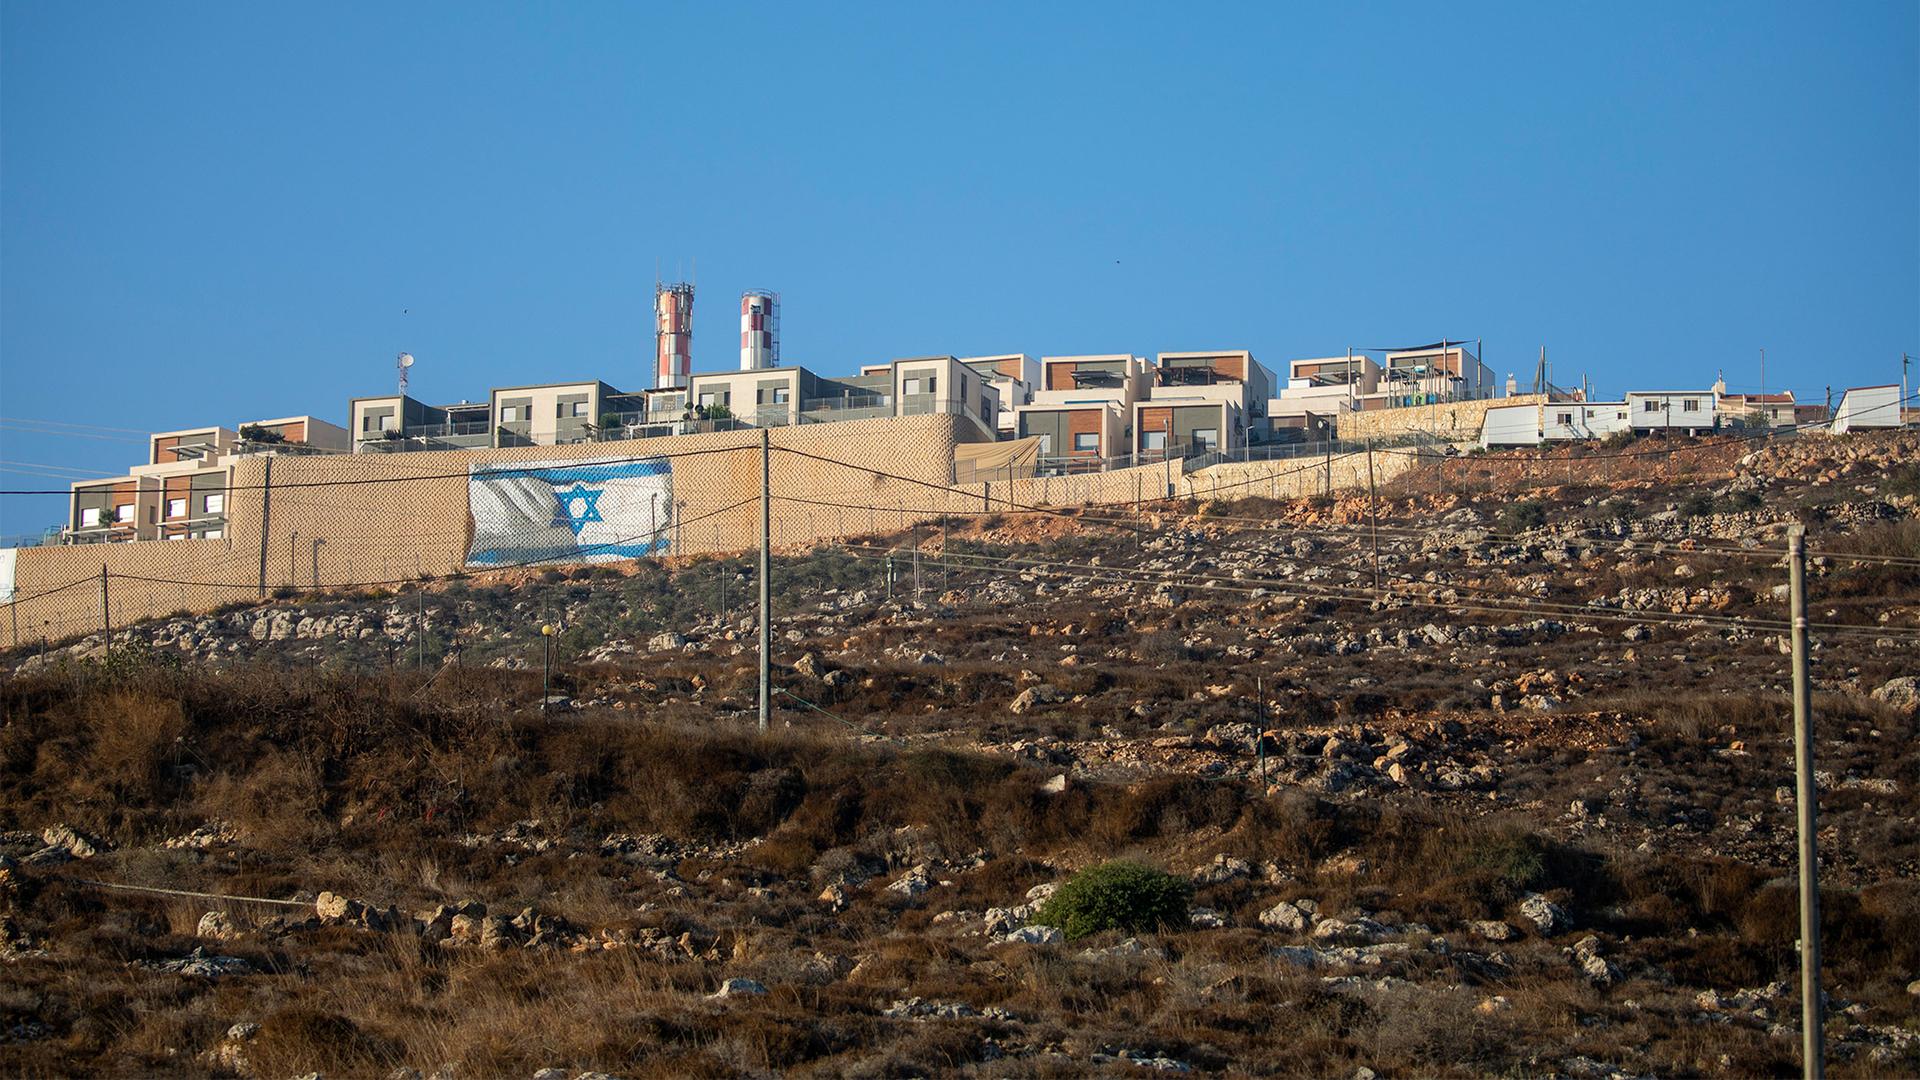 An Israeli flag on the surrounding wall of the West Bank Jewish settlement of Migdalim near the Palestinian town of Nablus, Oct. 25, 2021.